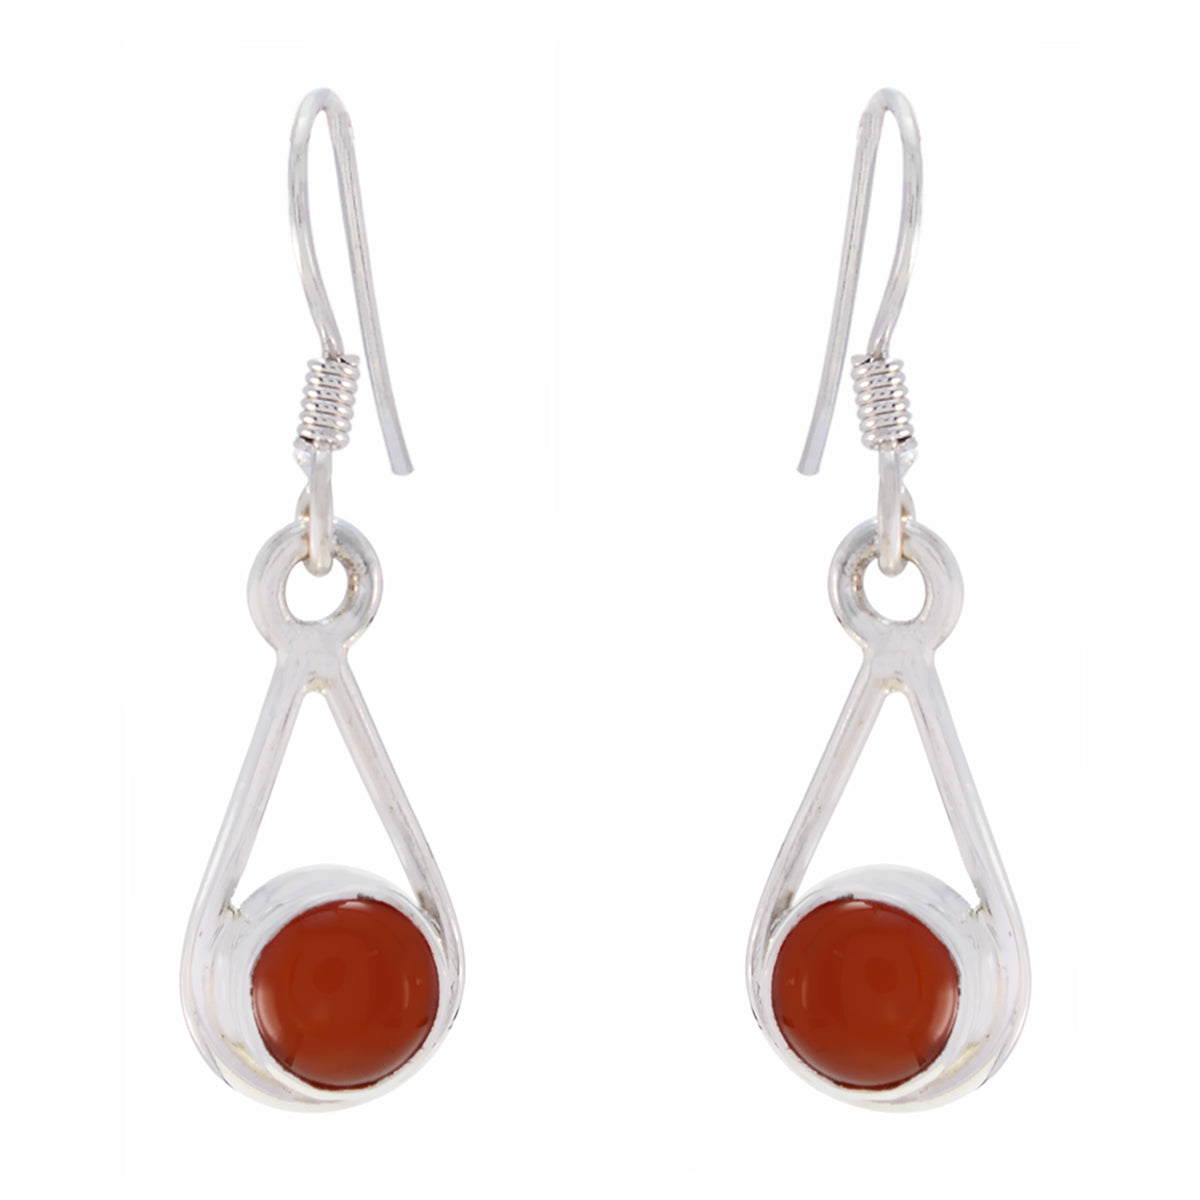 Riyo Nice Gemstone round Cabochon Red Onyx Silver Earrings gift for christmas day